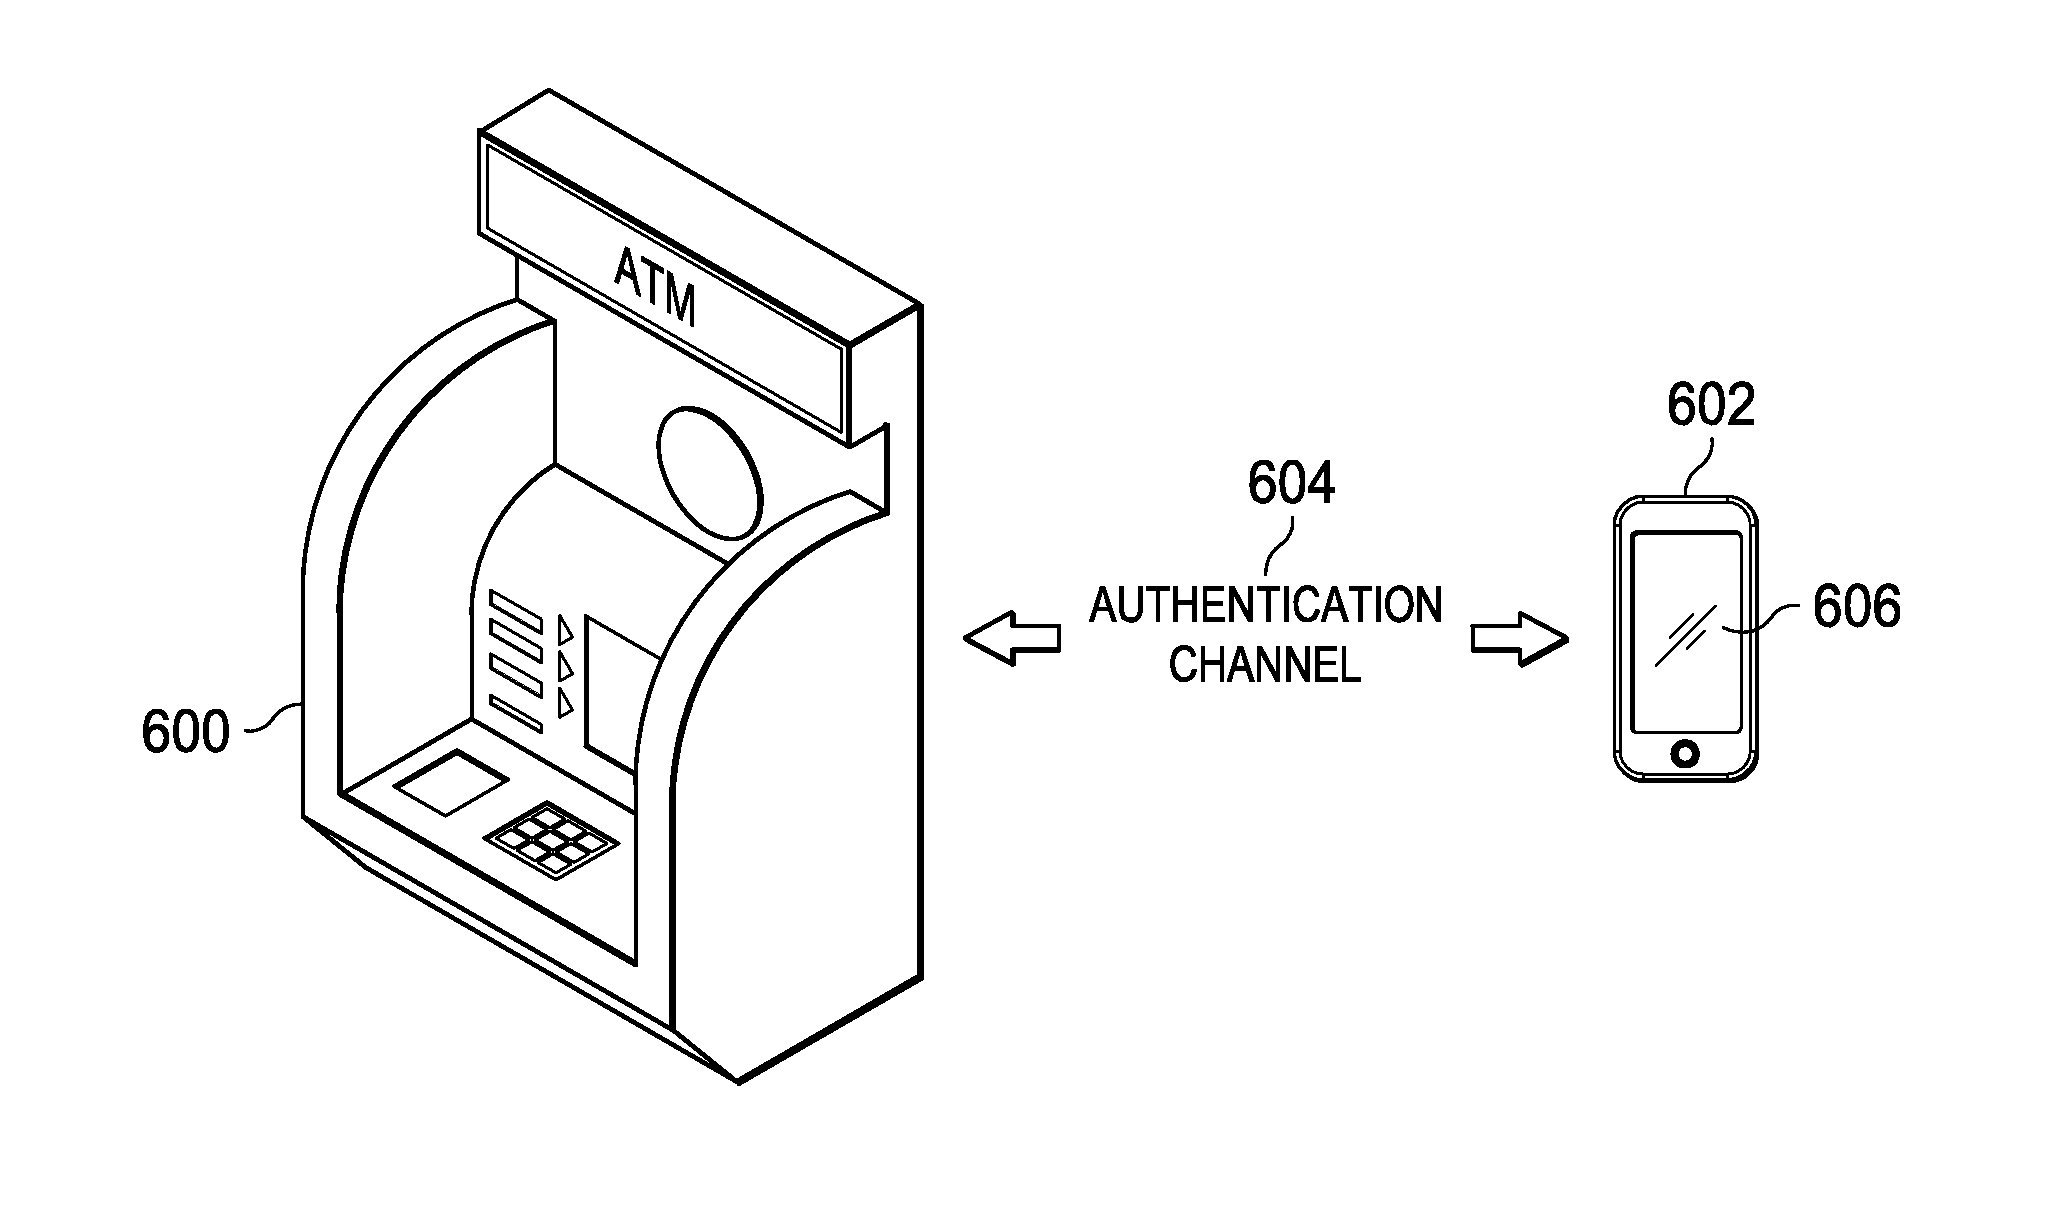 Mobile device-based keypad for enhanced security